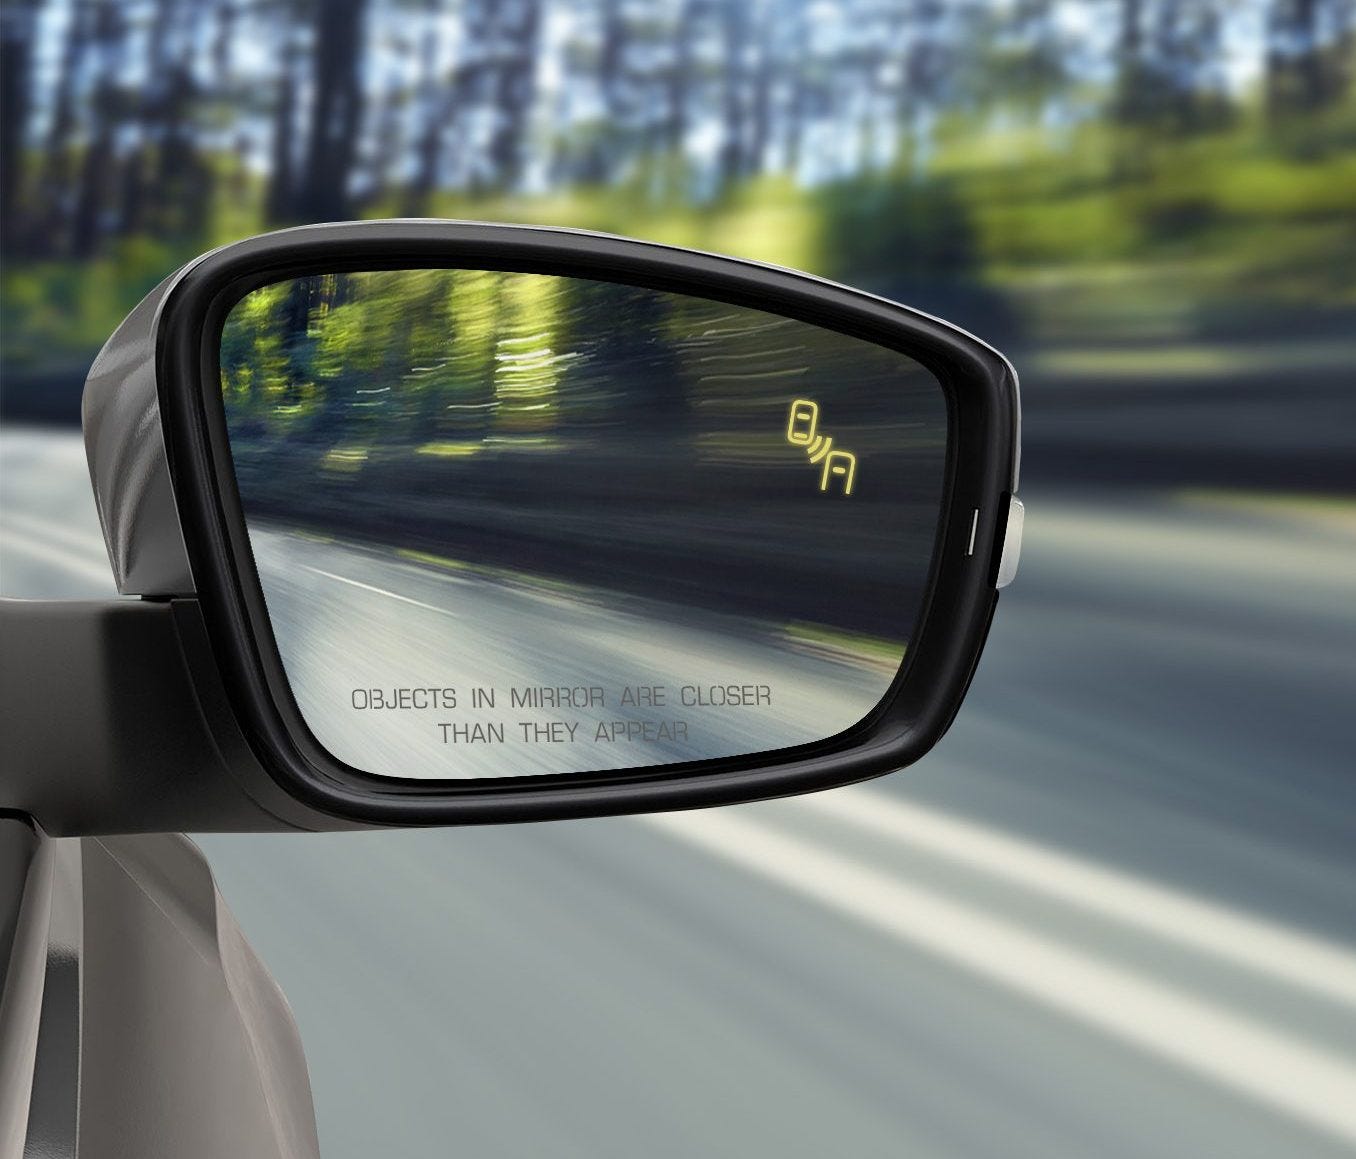 A blind spot monitoring system in this Volkswagen vehicle activates a small, lighted icon in the side-view mirror.